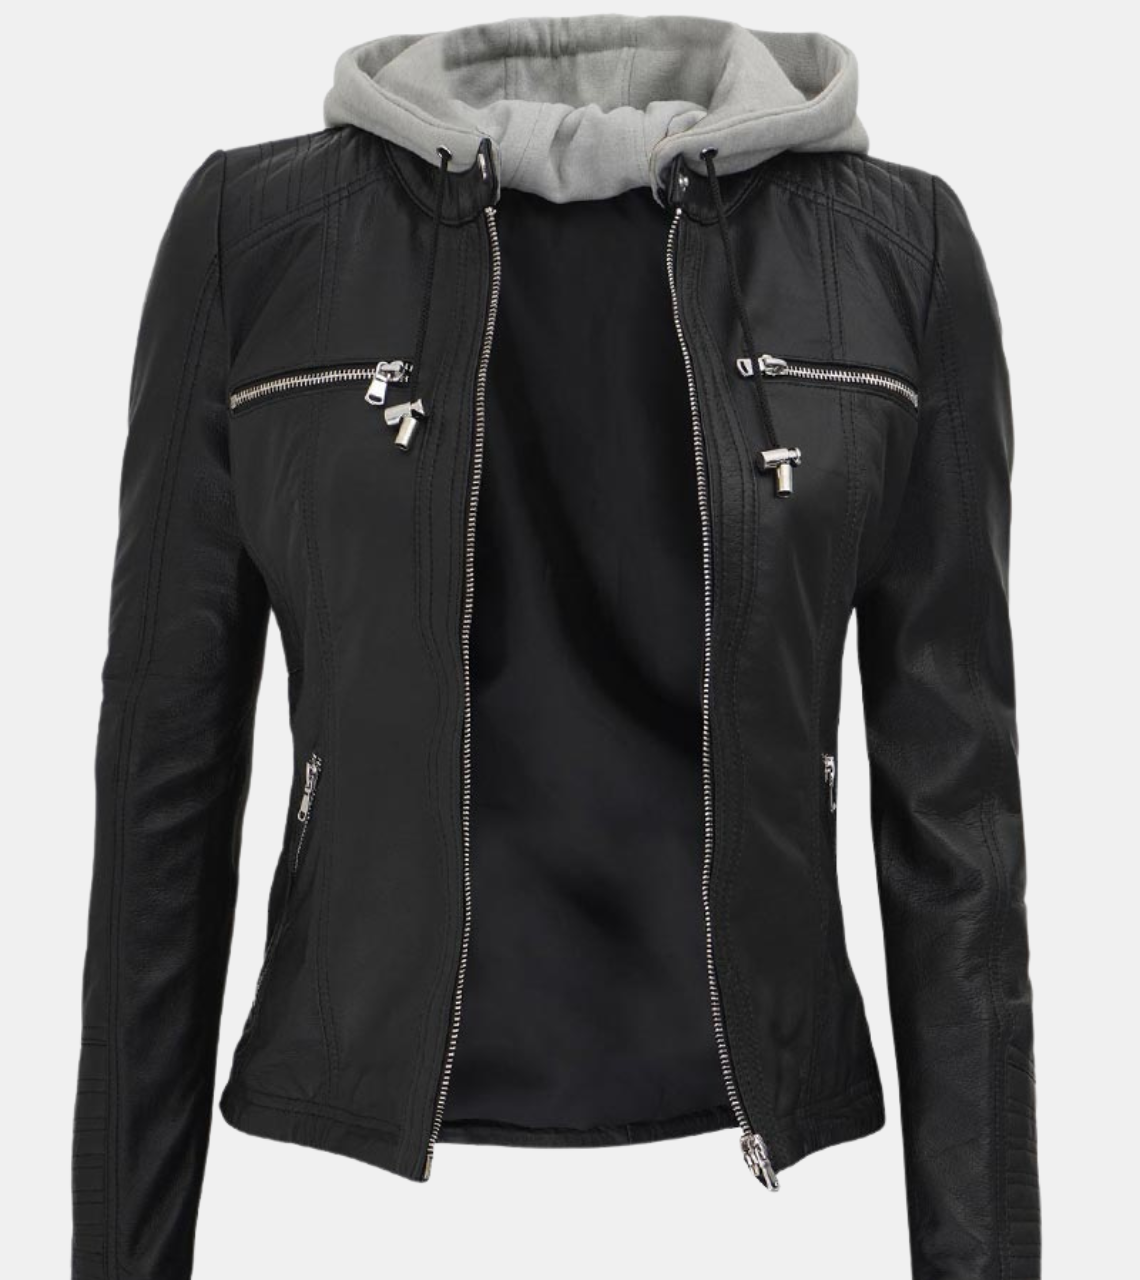 Women's Removable Hooded Black Leather Jacket